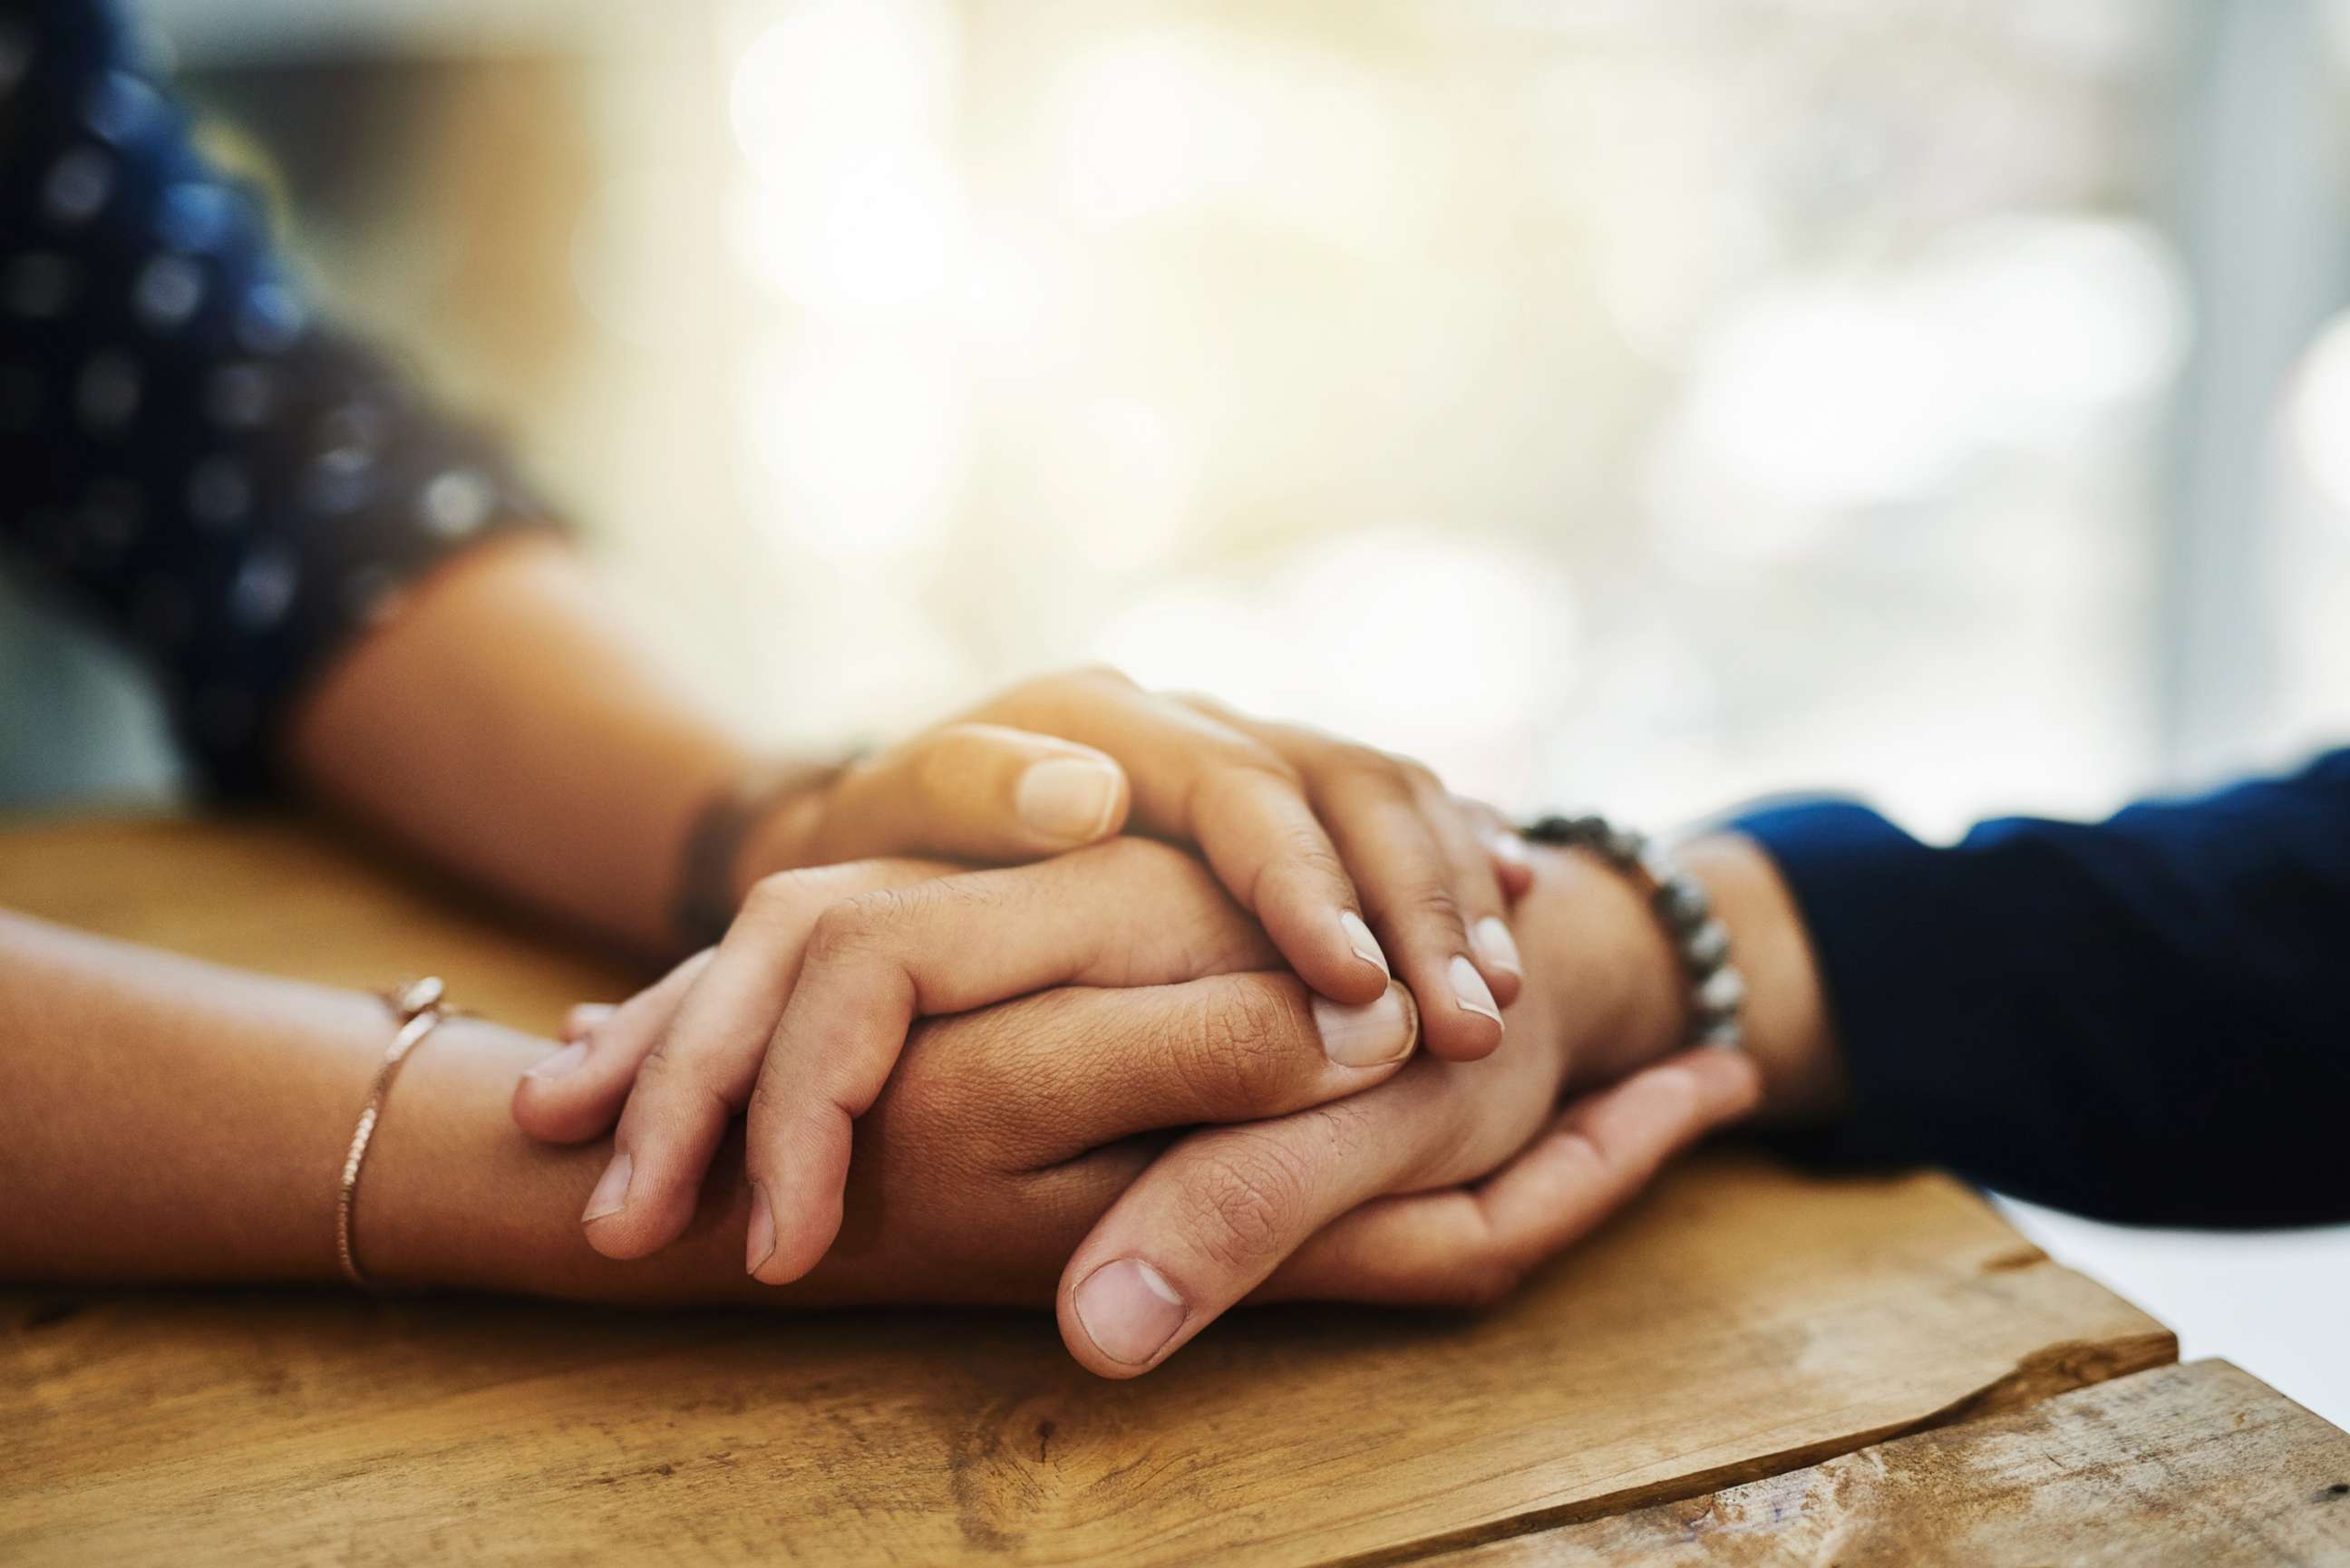 PHOTO: An undated stock photo depicts two people holding hands in comfort.